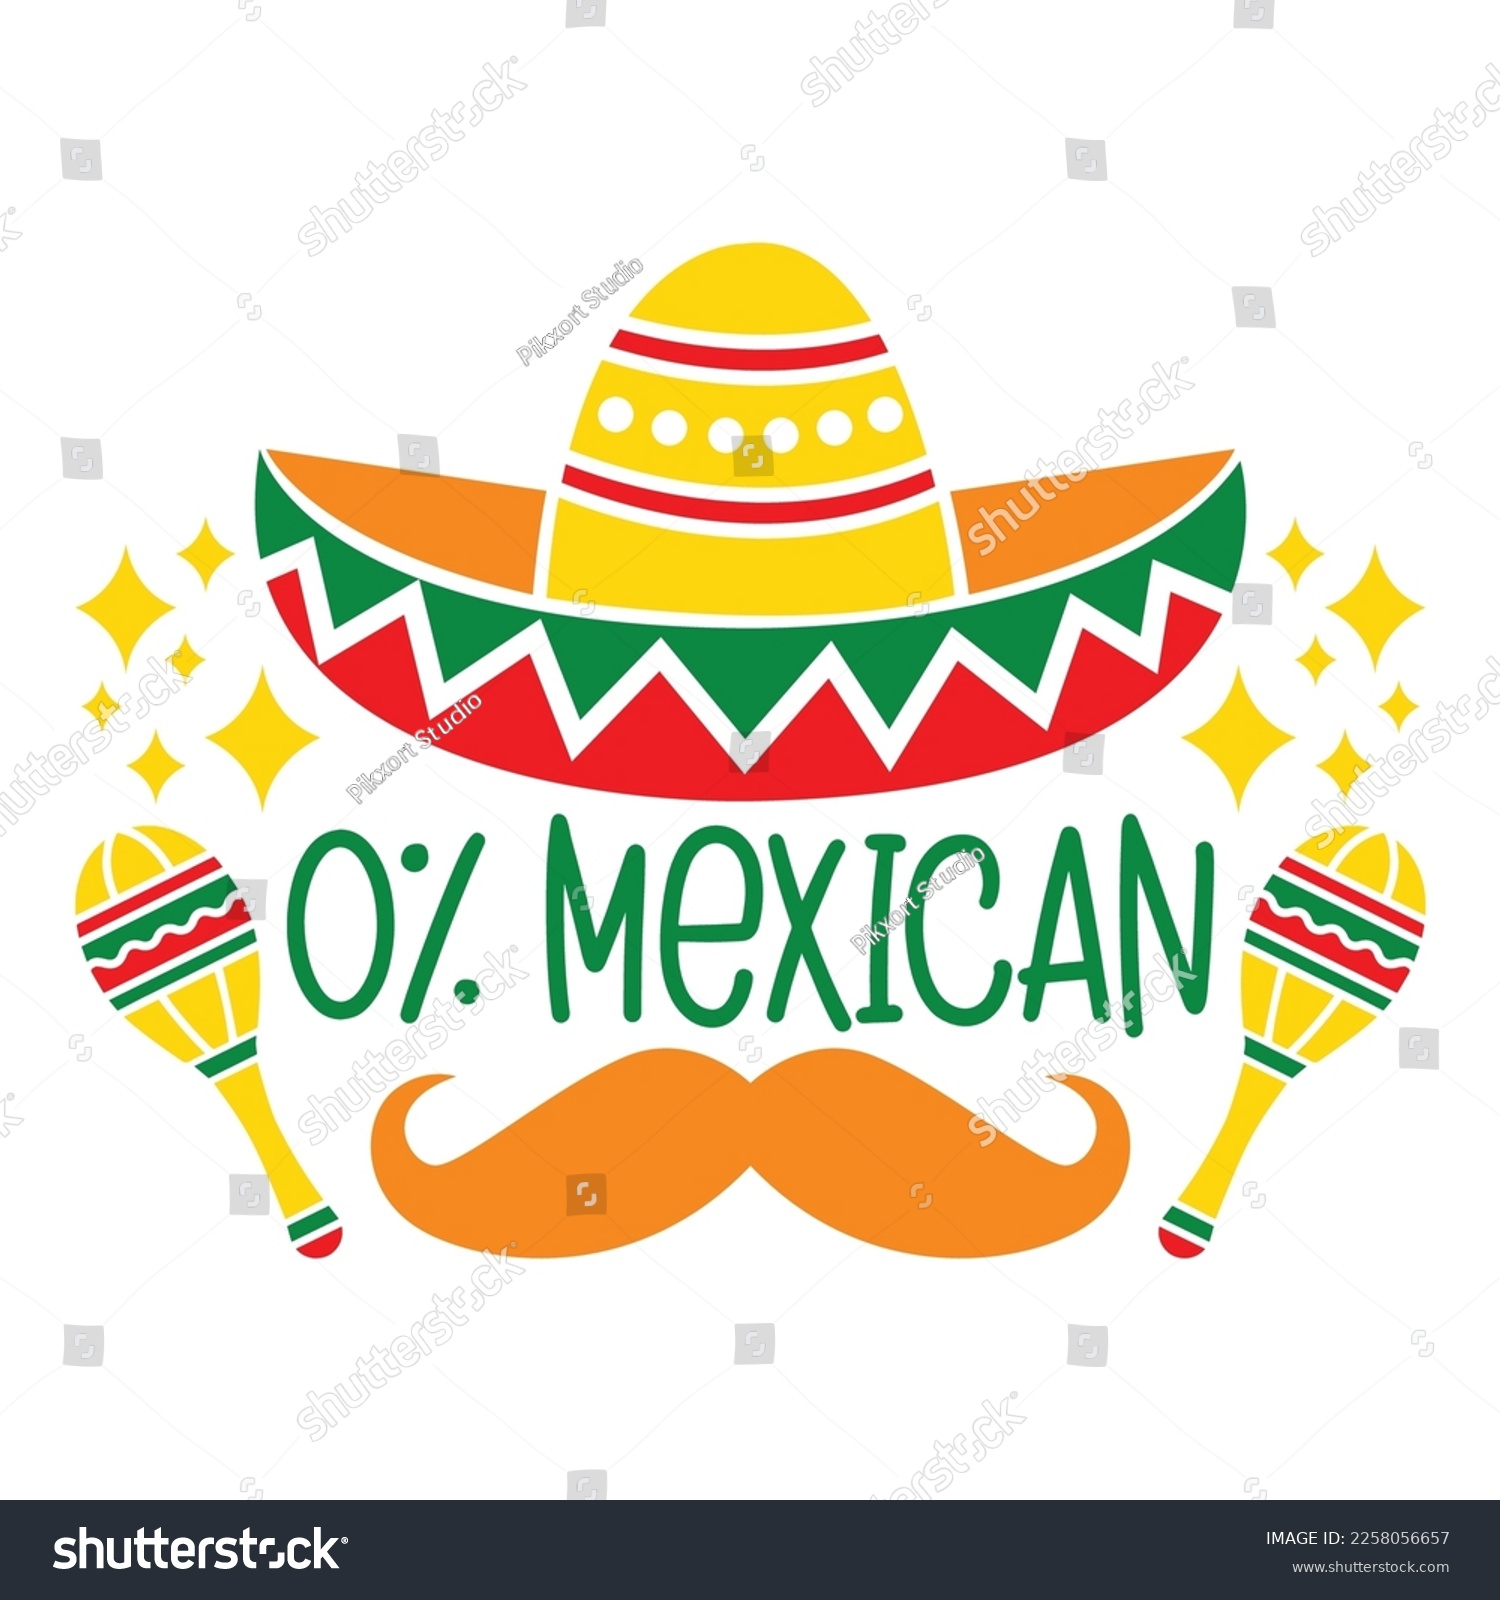 SVG of Cinco de Mayo - May 5, Federal Holiday in Mexico. Fiesta Banner And Poster Design With Flags, Flowers, Fecorations, Maracas And Sombrero svg